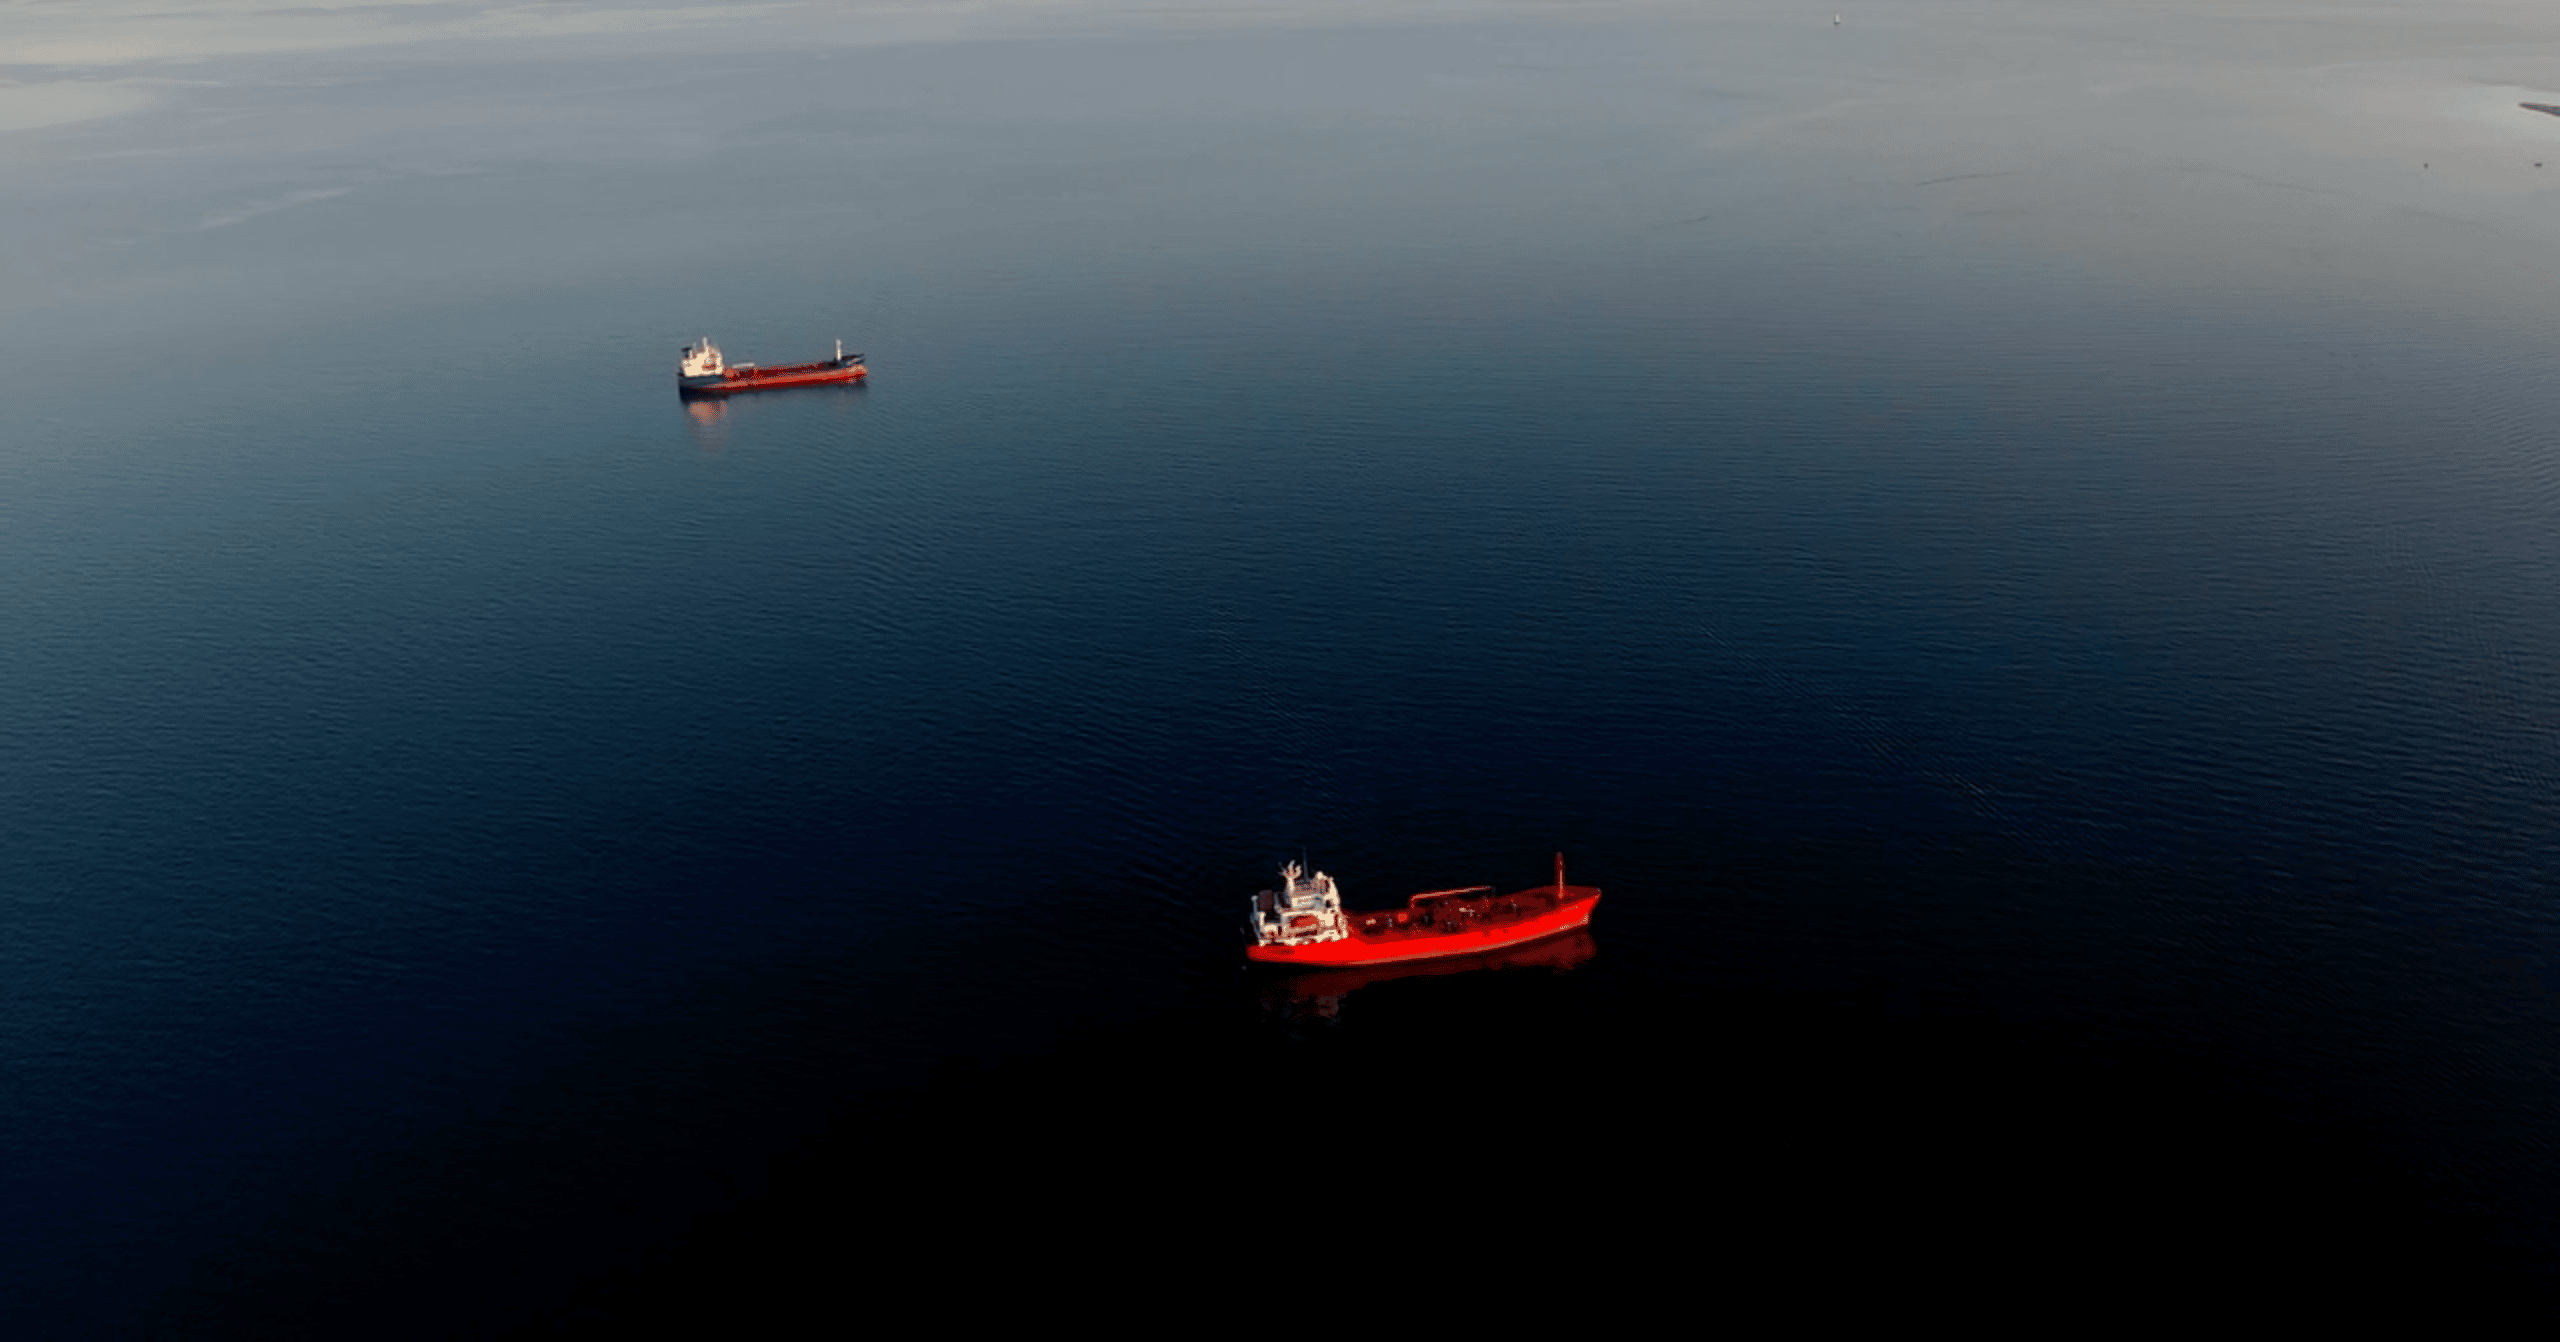 Two red tankers on the ocean associated with the Grieg Shipbrokers tank services.